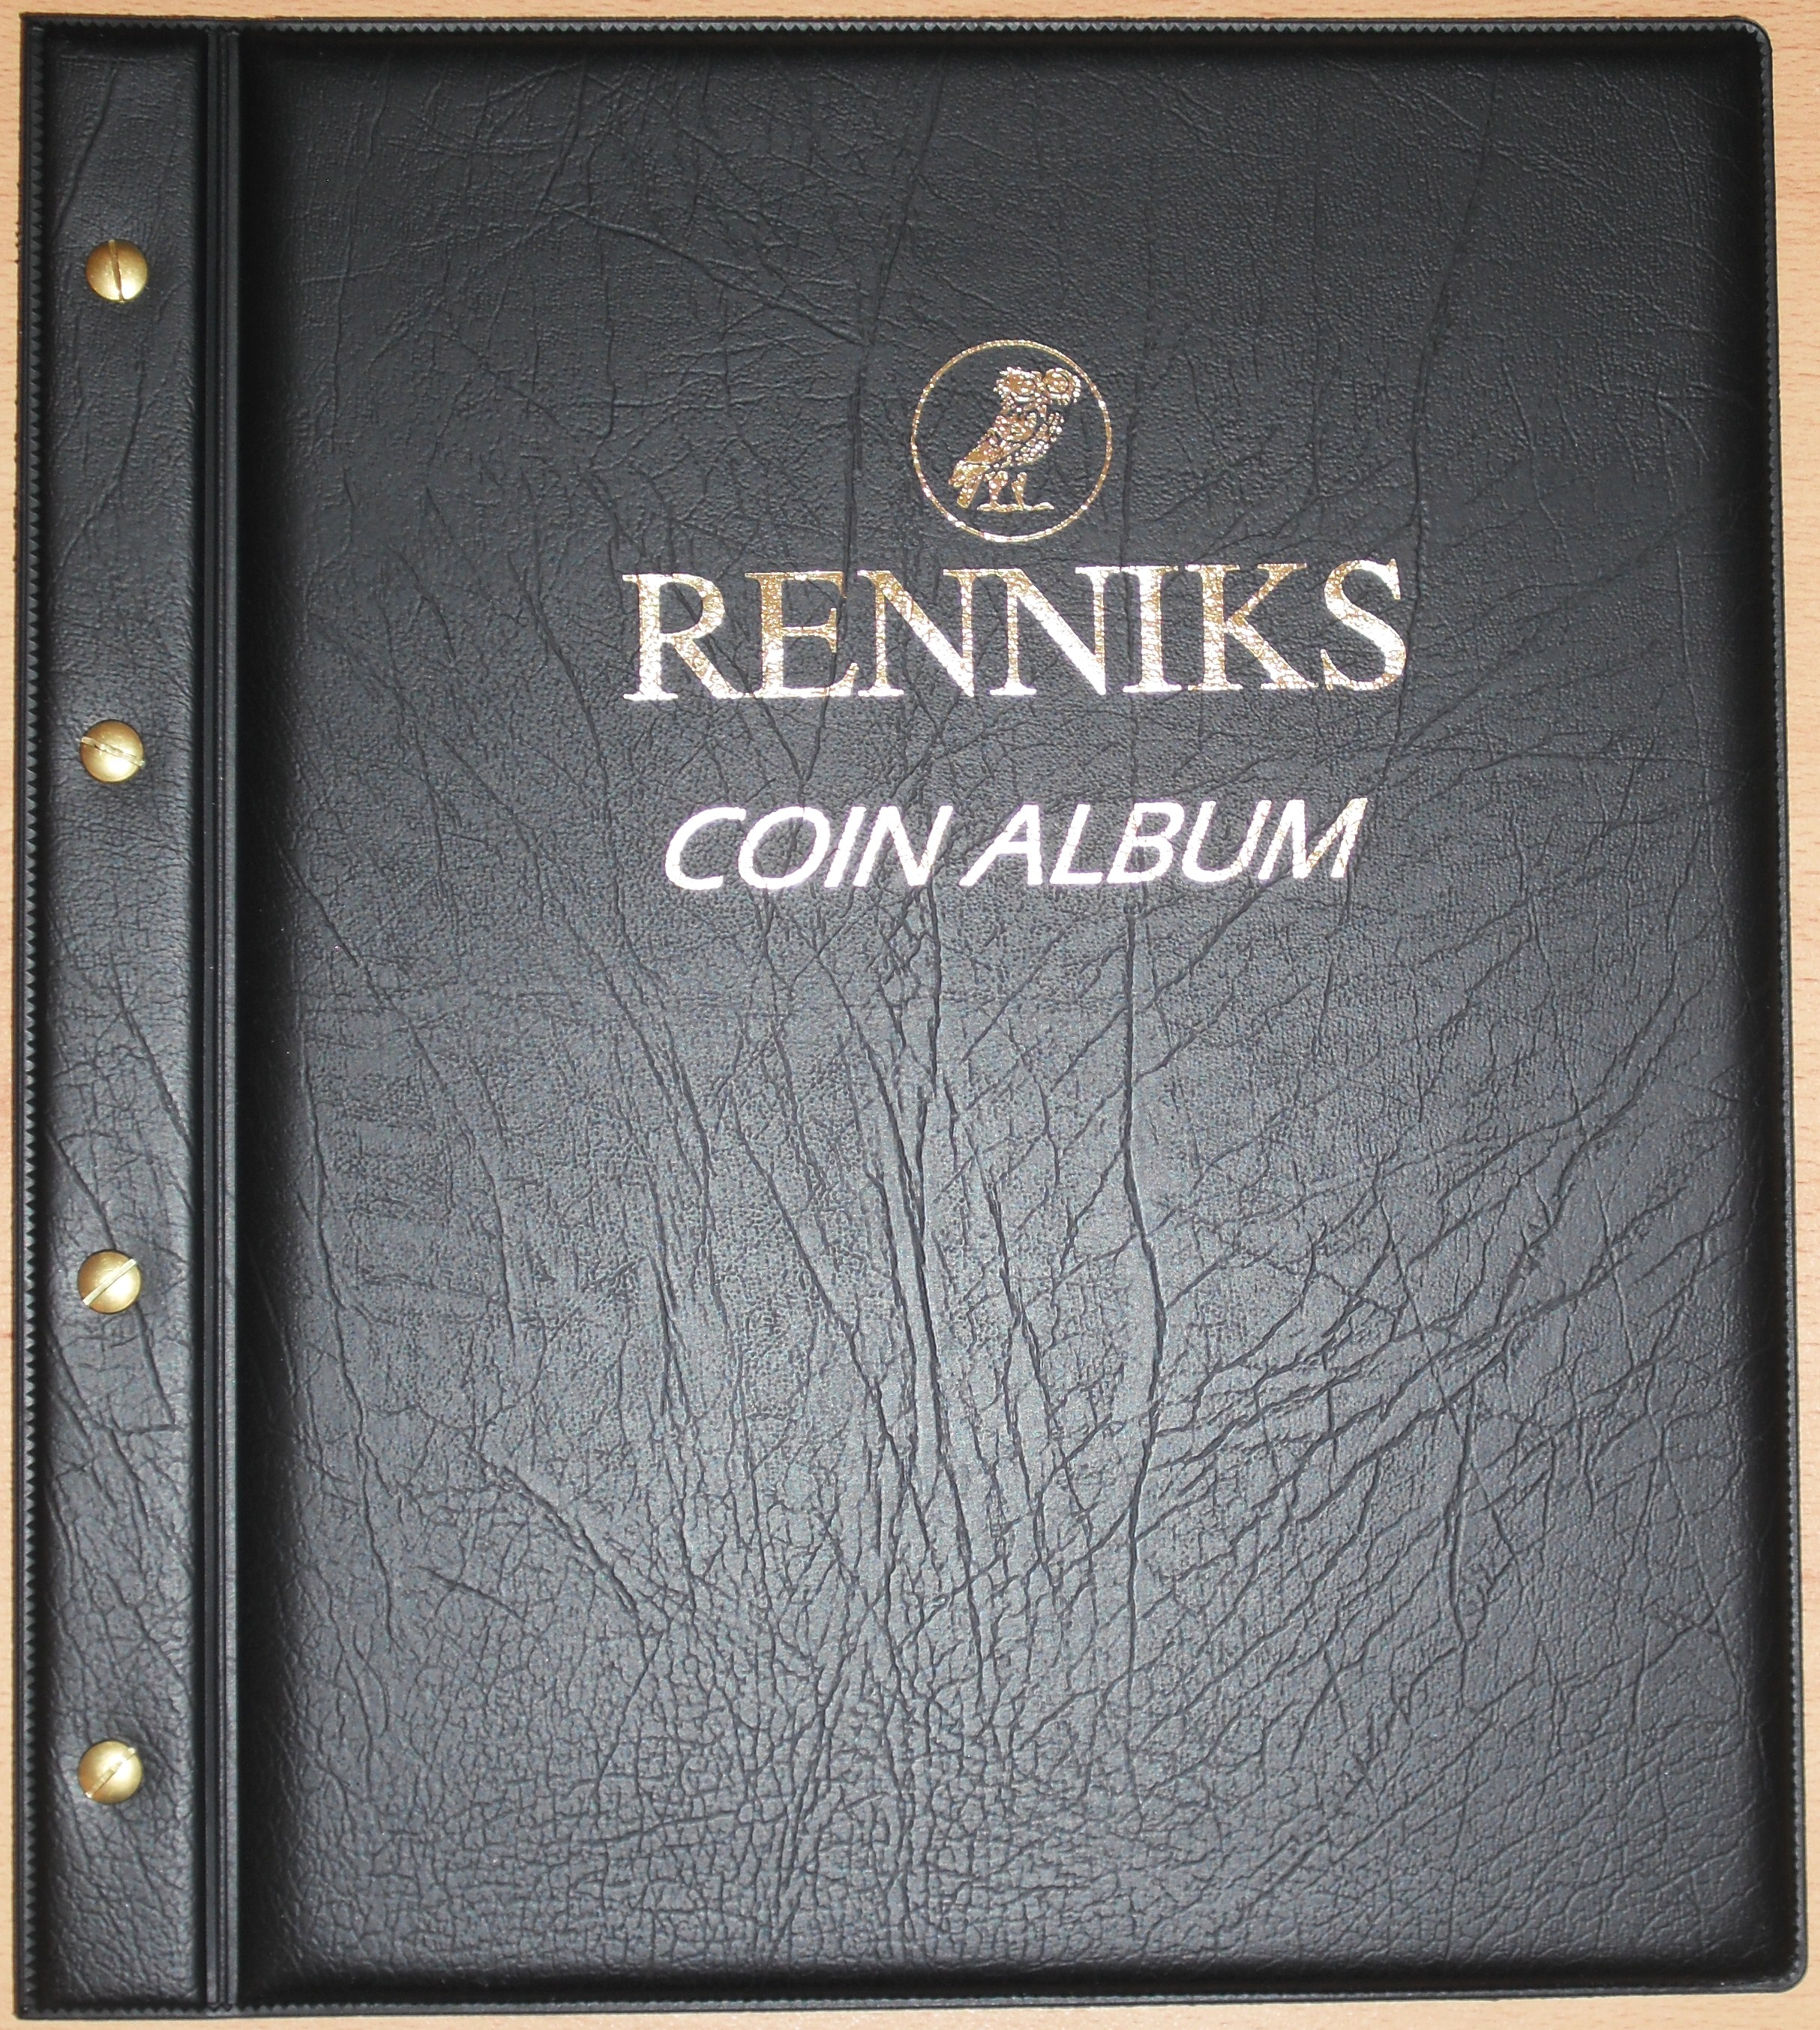 BLACK Renniks Coin Album Padded leatherette Cover Including 6 Coin Album Pages